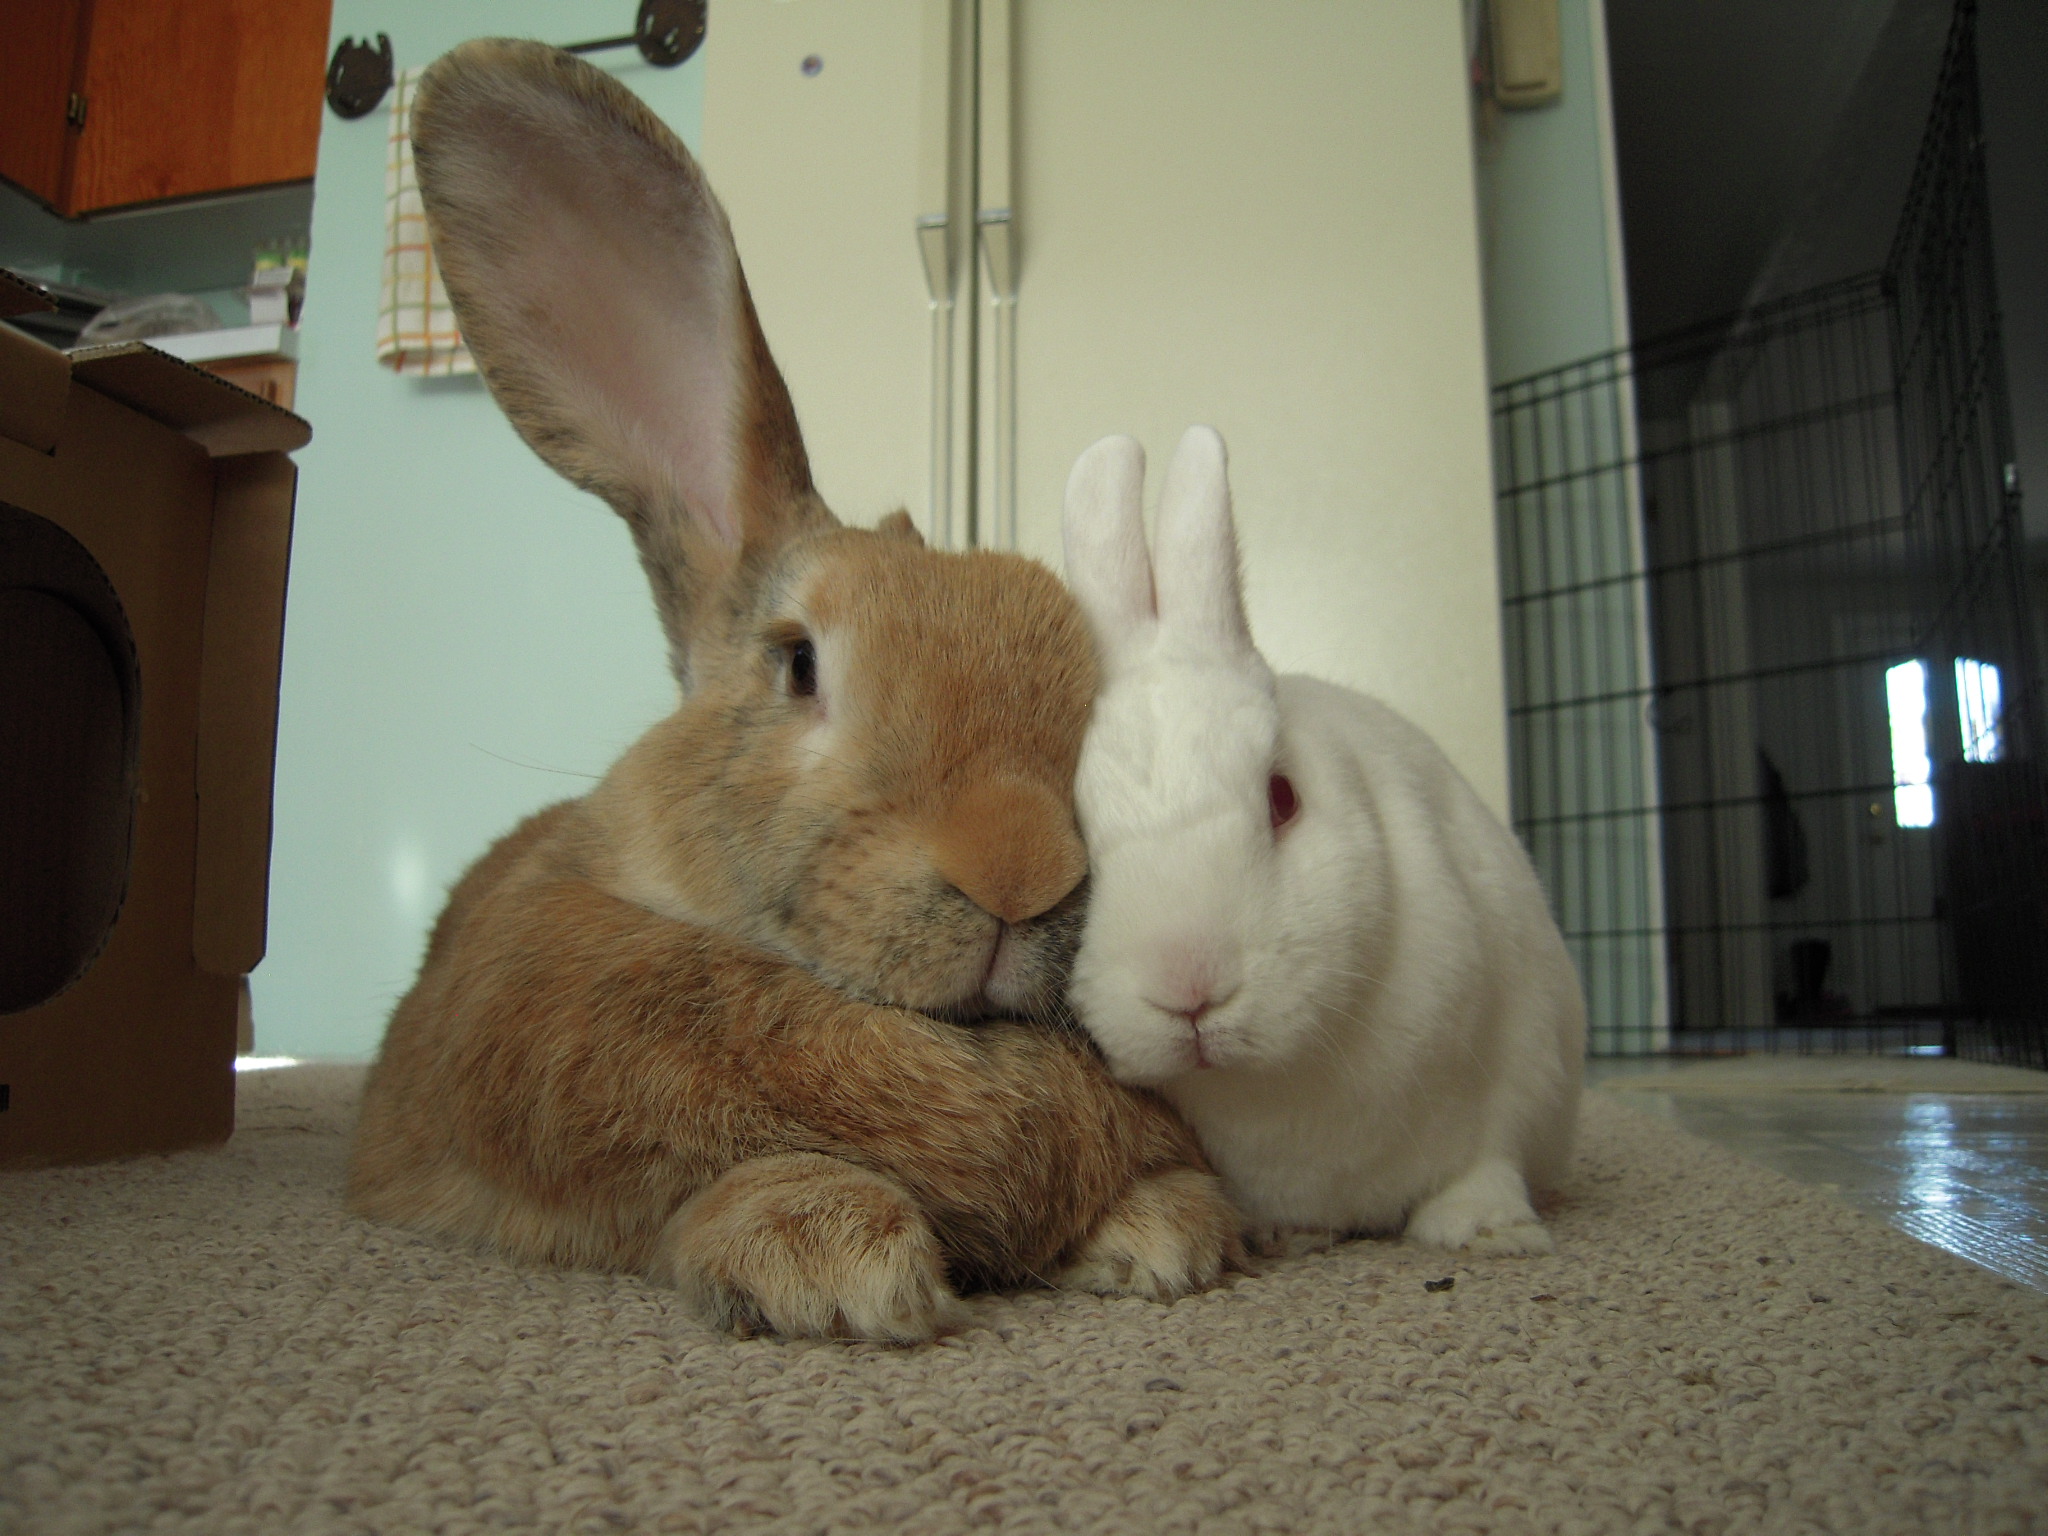 Bunnies Have Some Quiet Snuggle Time